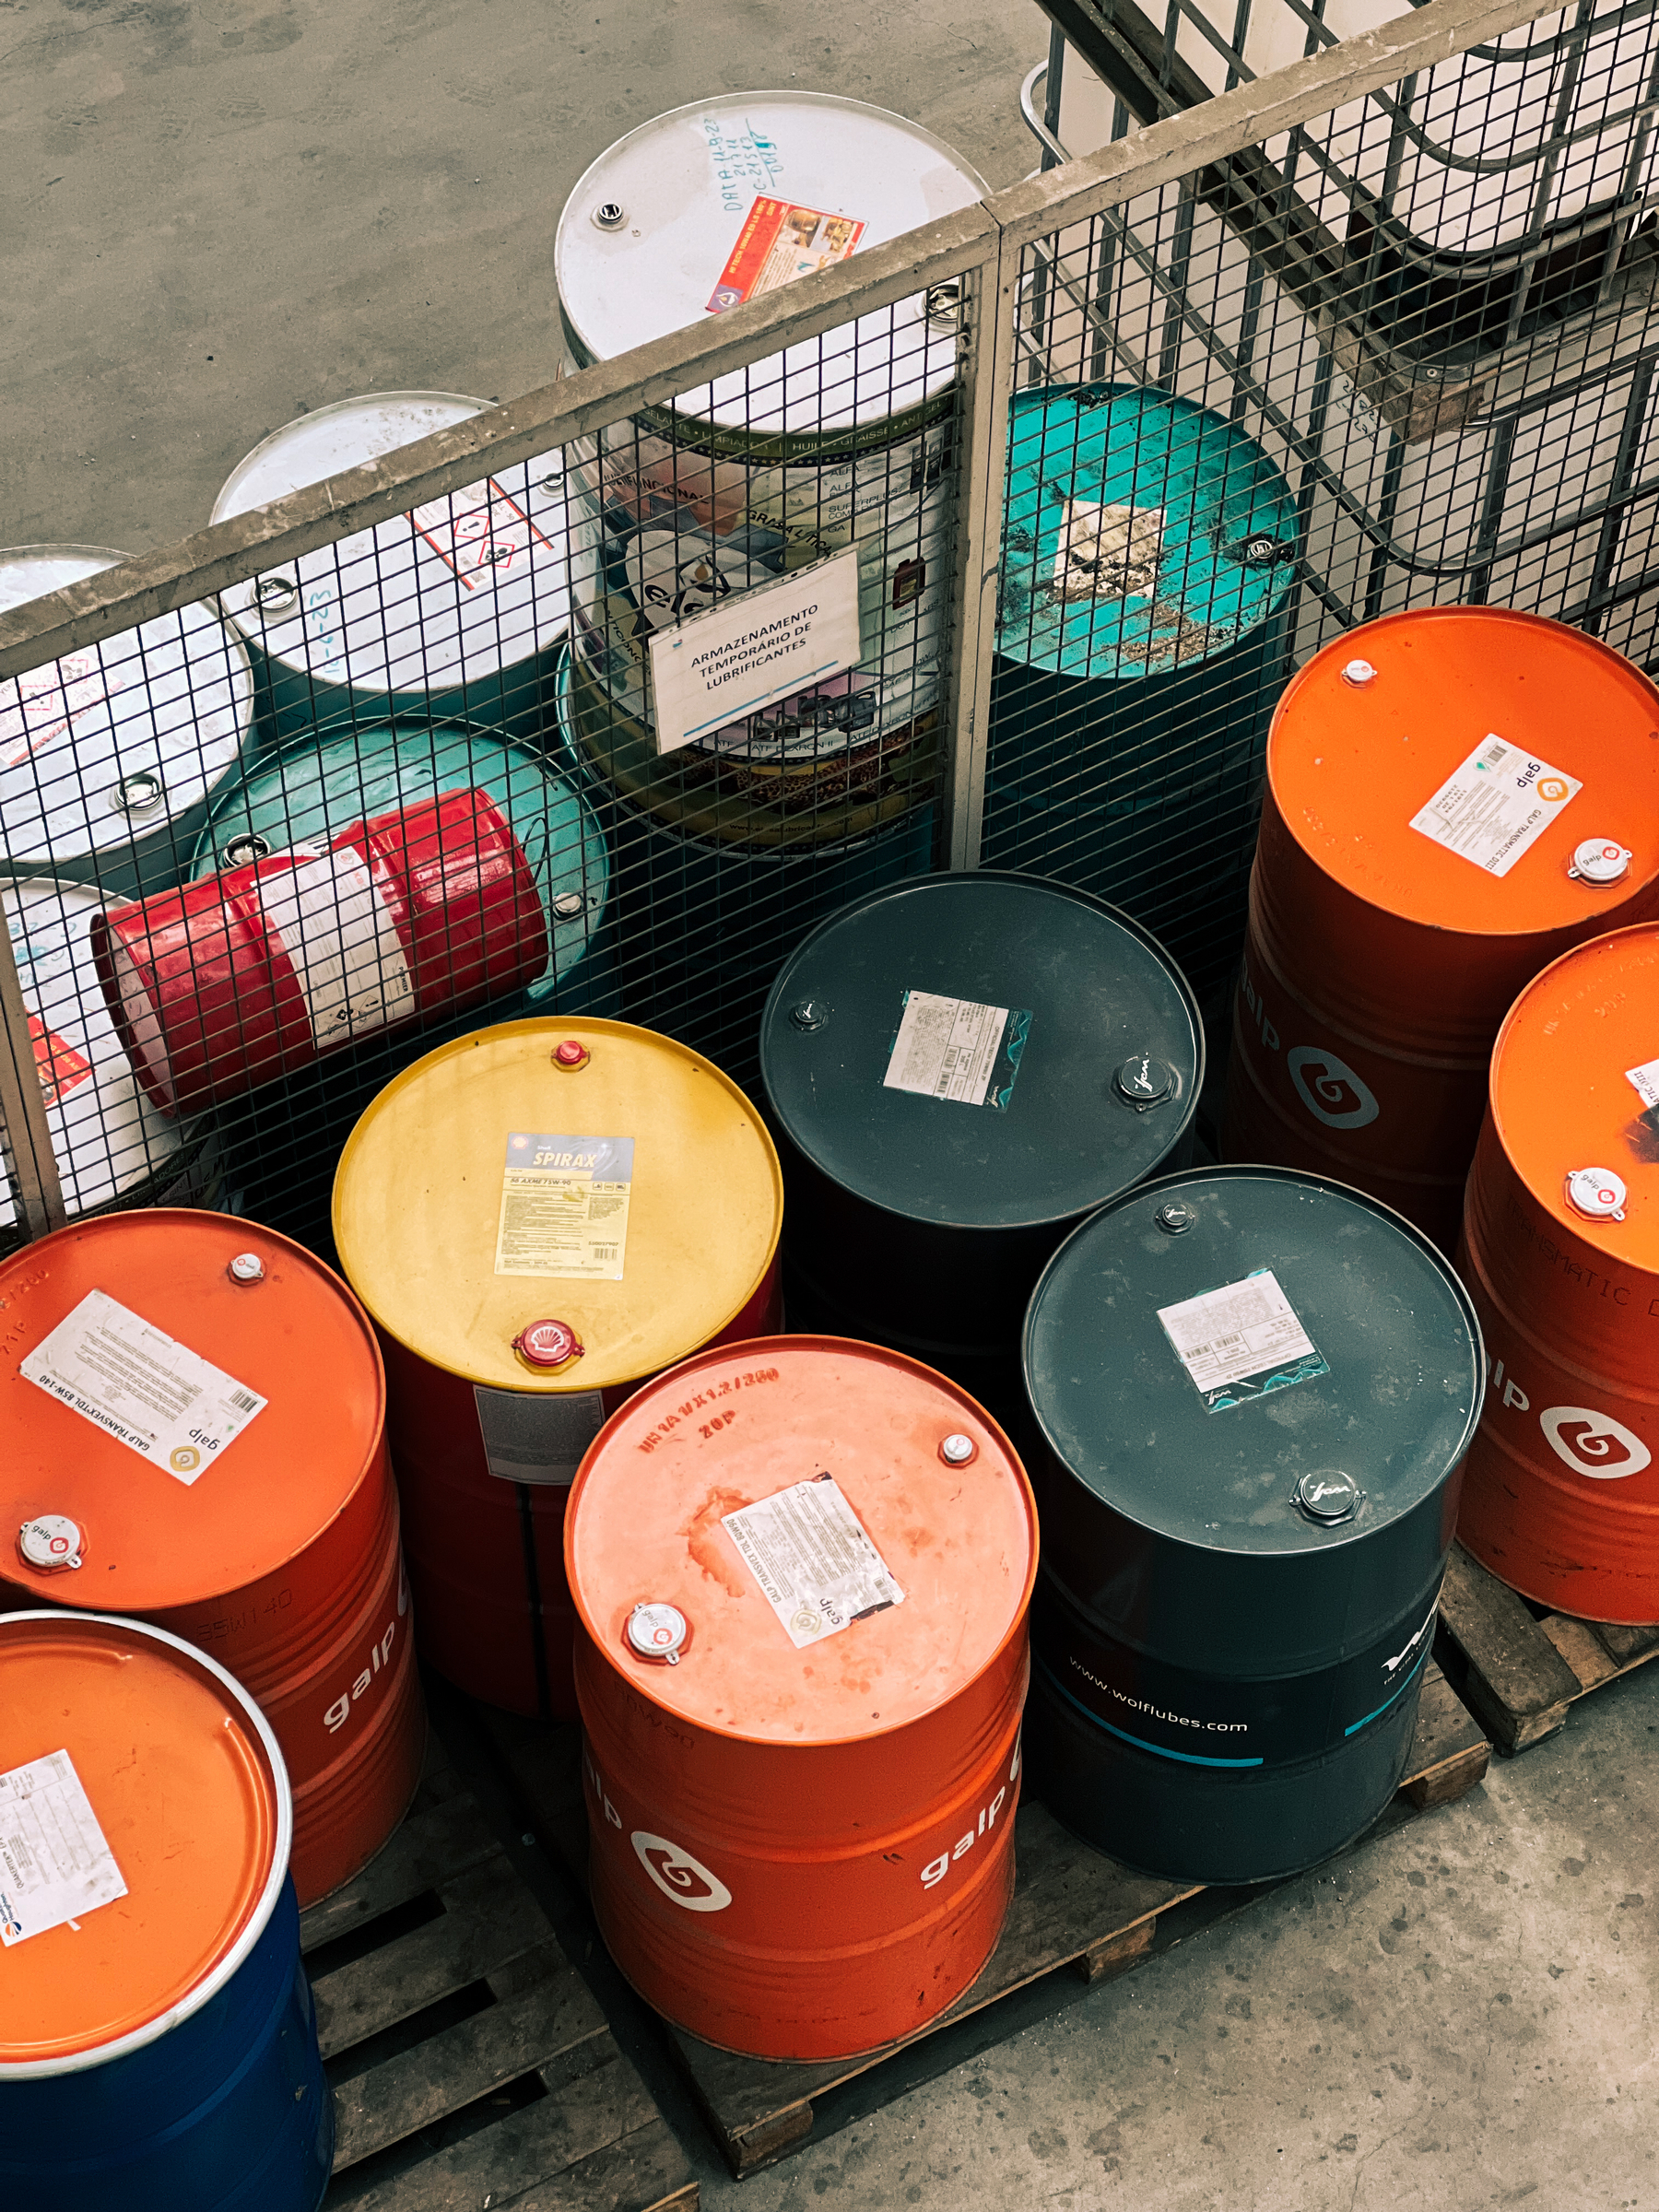 Industrial storage drums in various colors including red, yellow, blue, white, and black, stored within a metal cage on a concrete floor. Some barrels display labels and hazard signs.